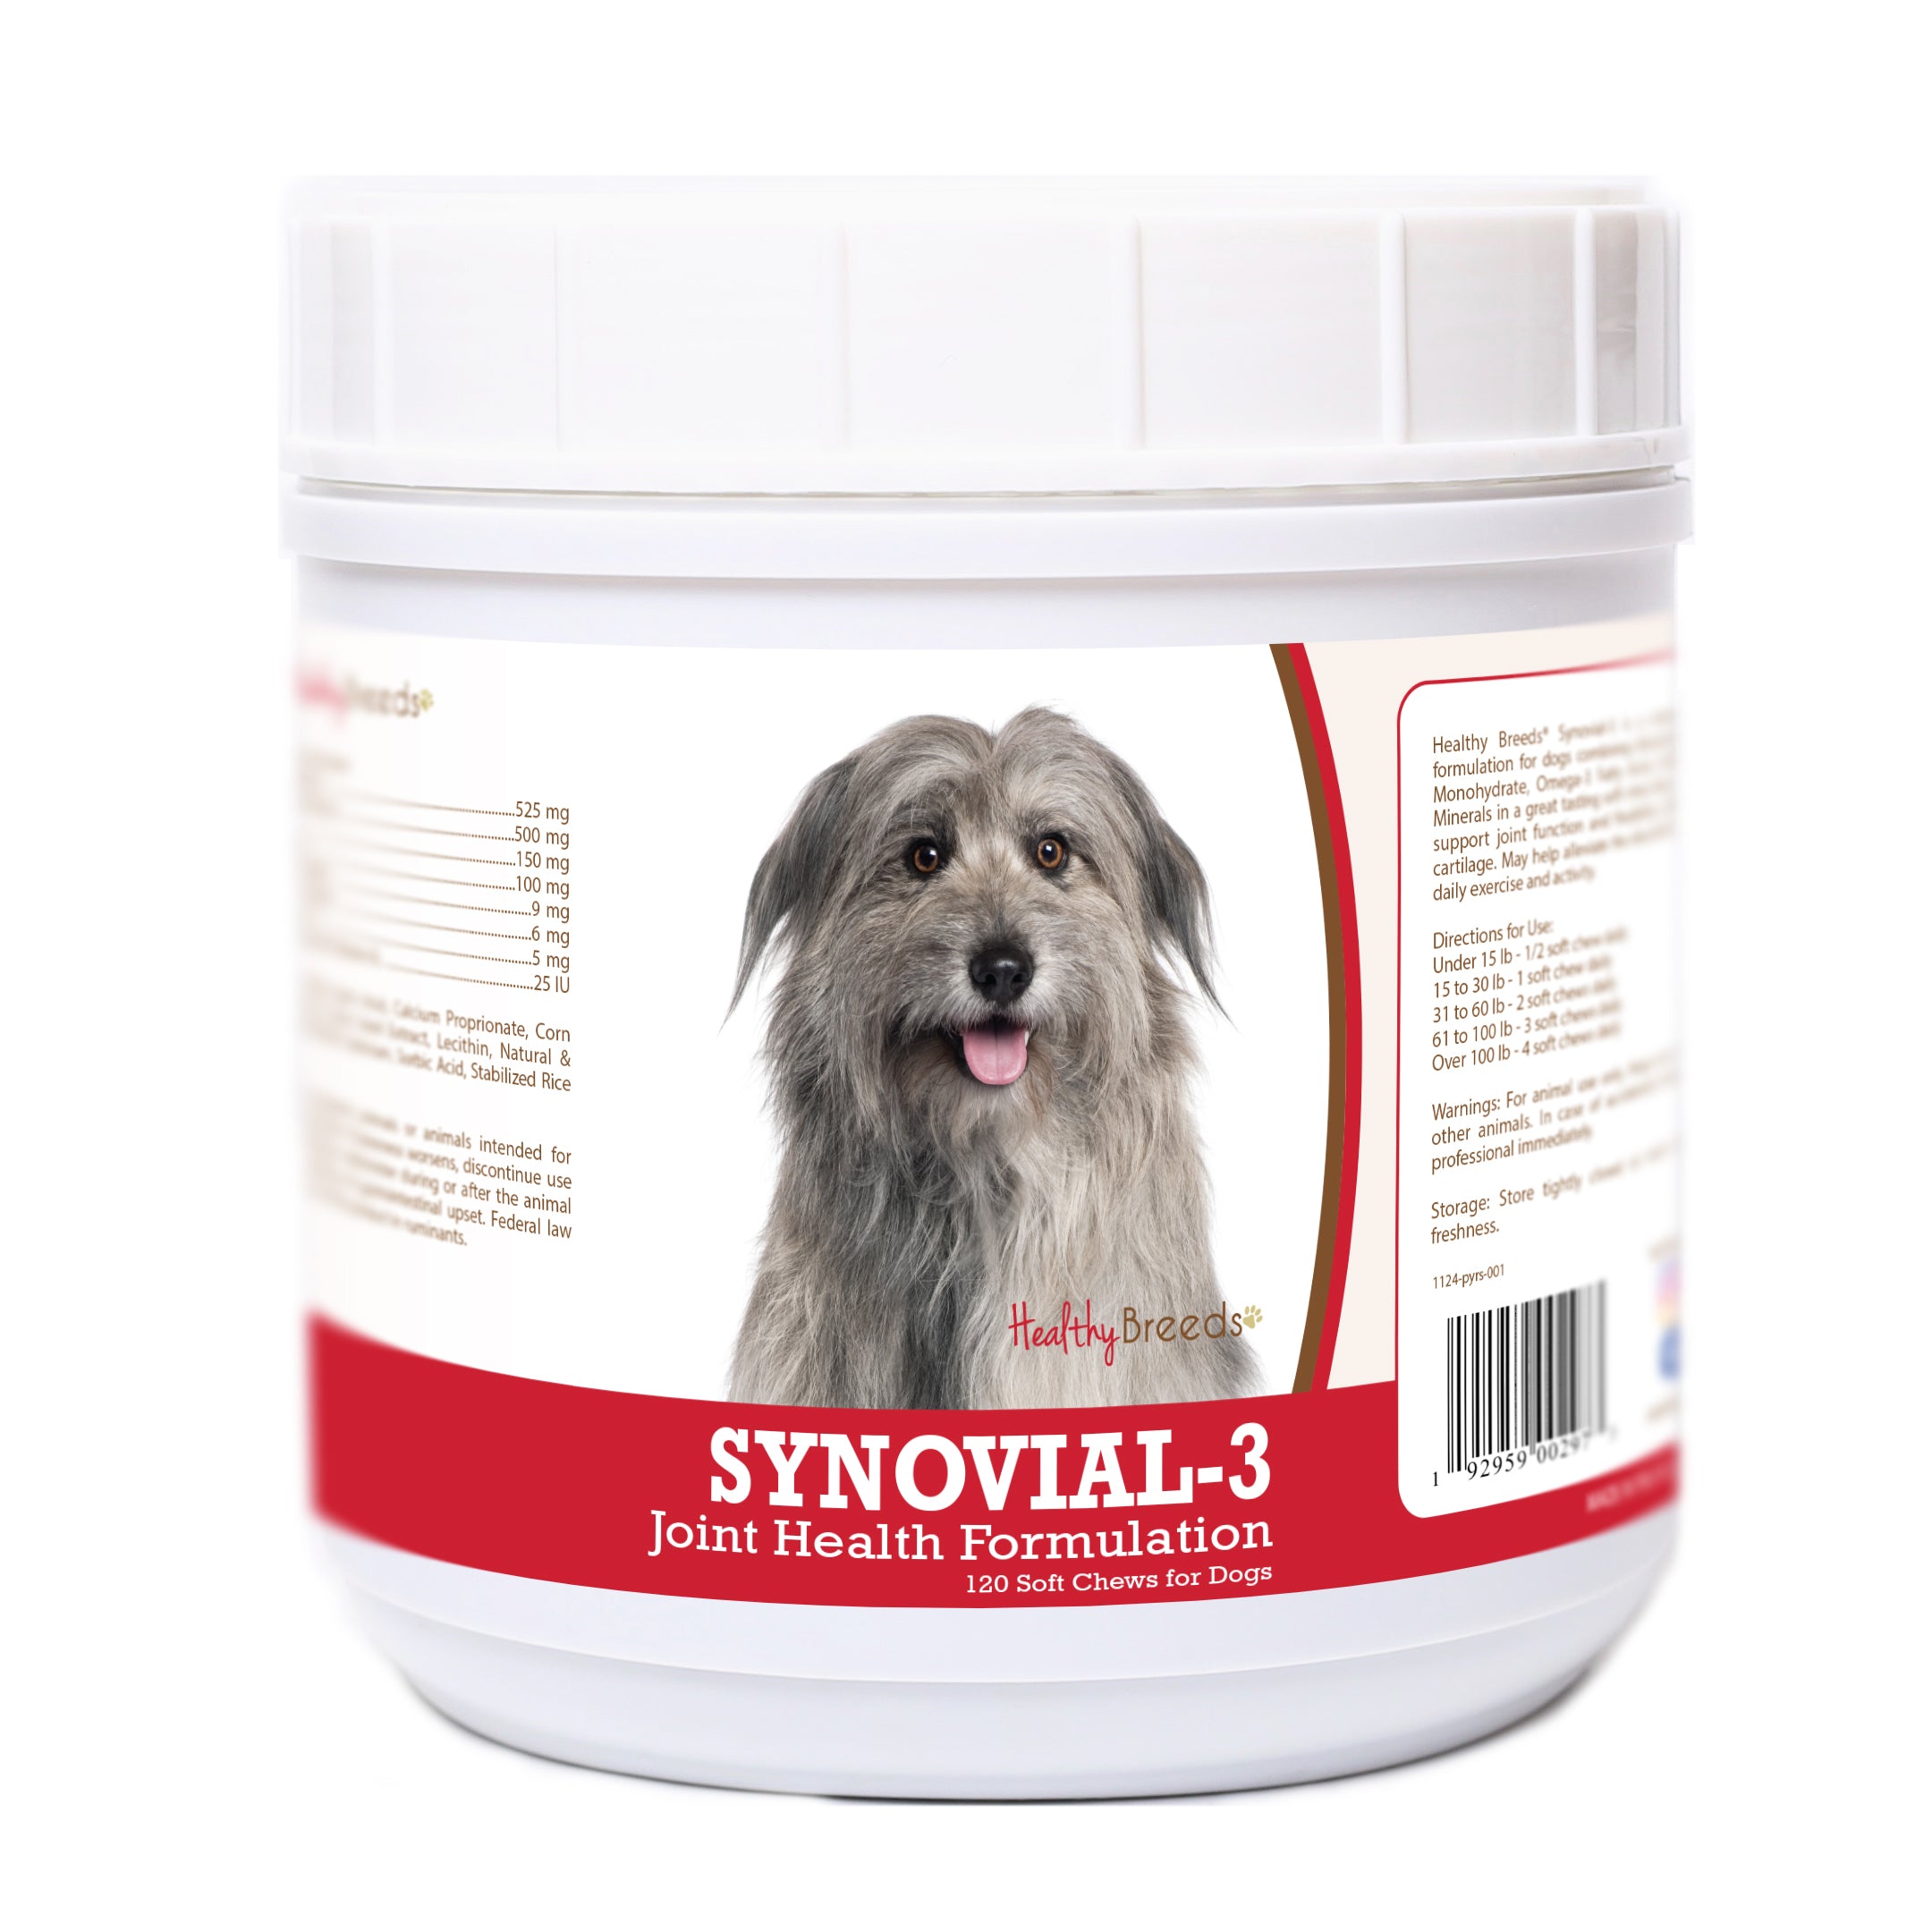 Pyrenean Shepherd Synovial-3 Joint Health Formulation Soft Chews 120 Count